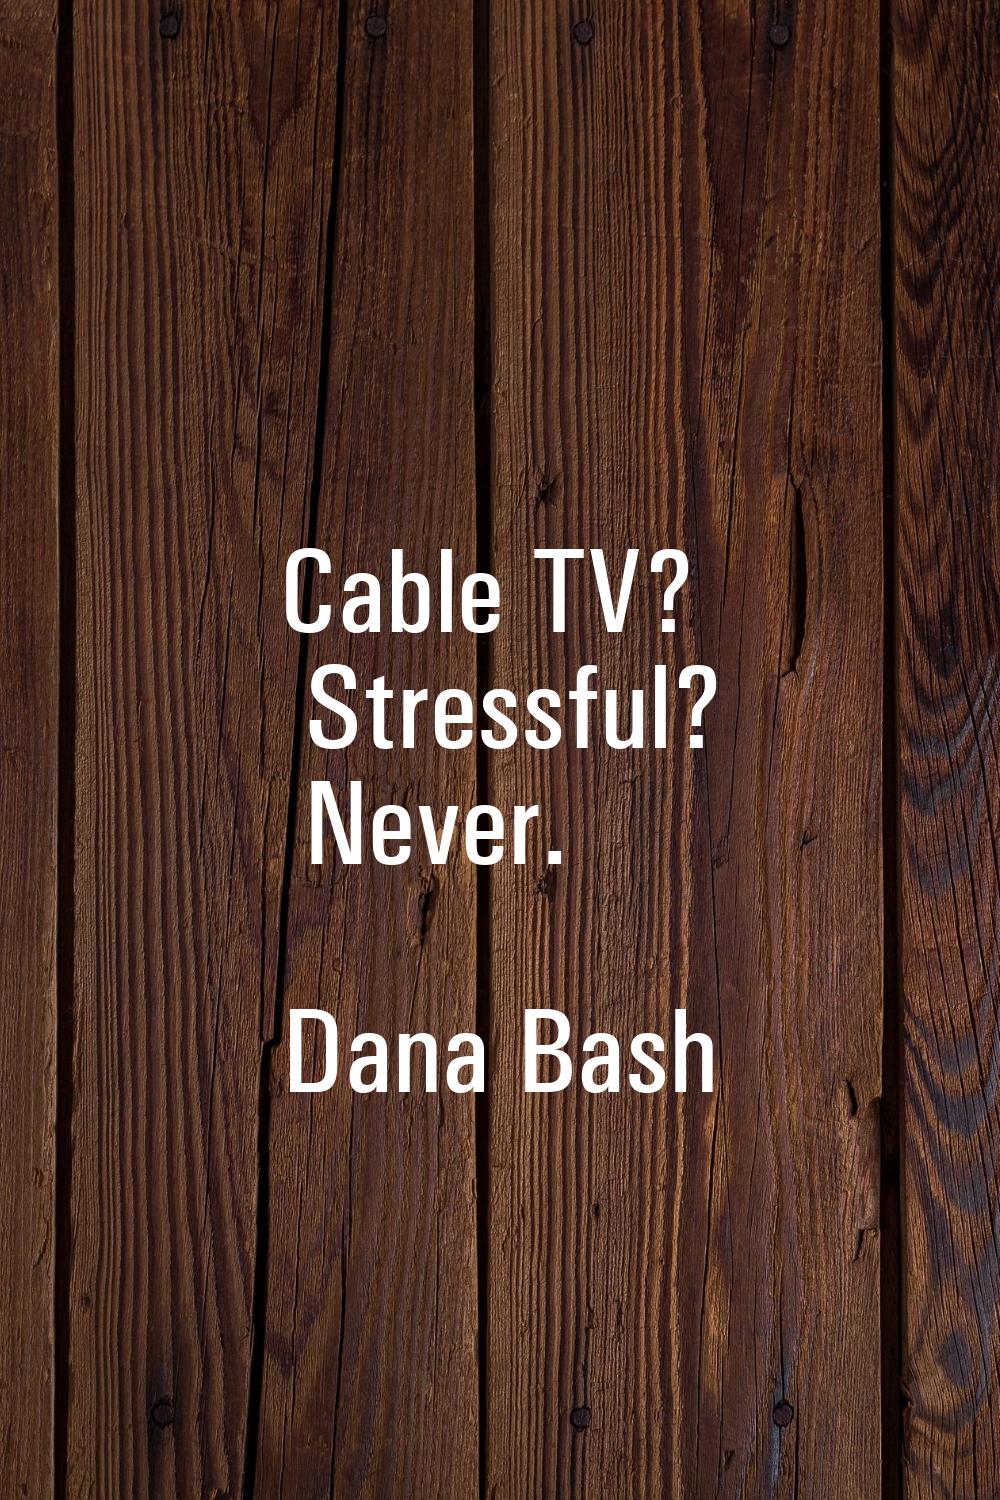 Cable TV? Stressful? Never.